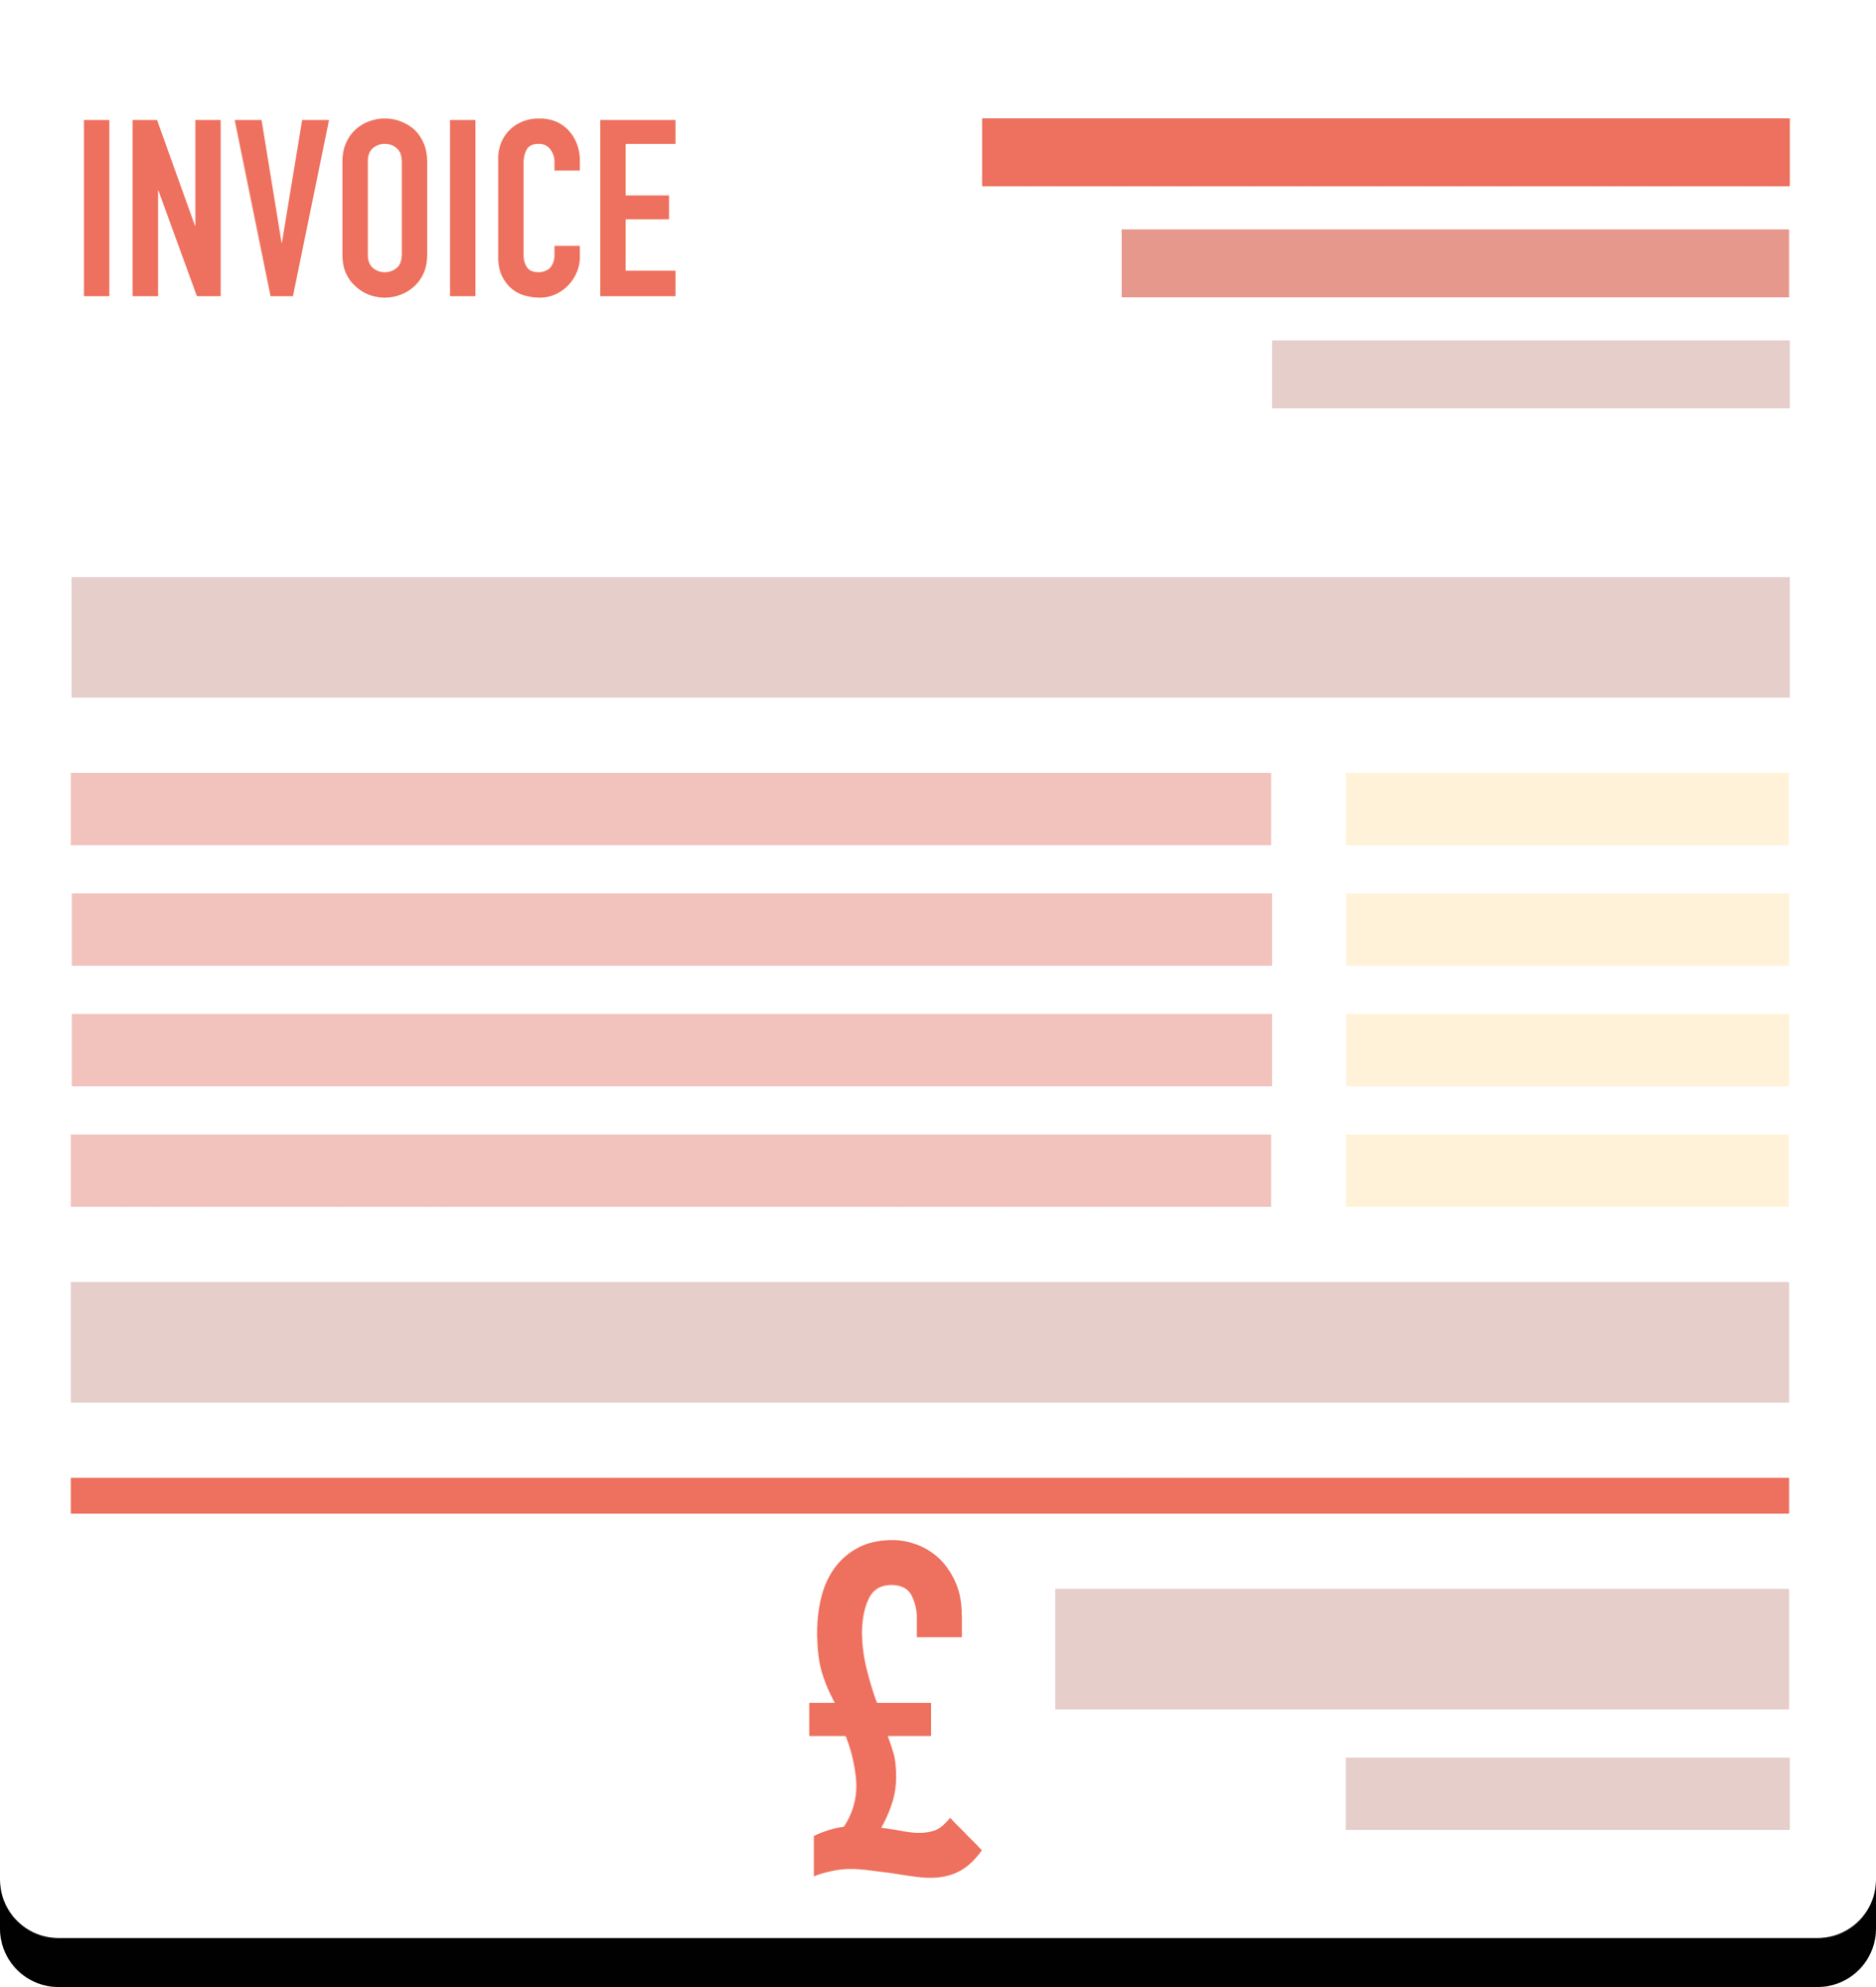 Invoice template for HVAC 